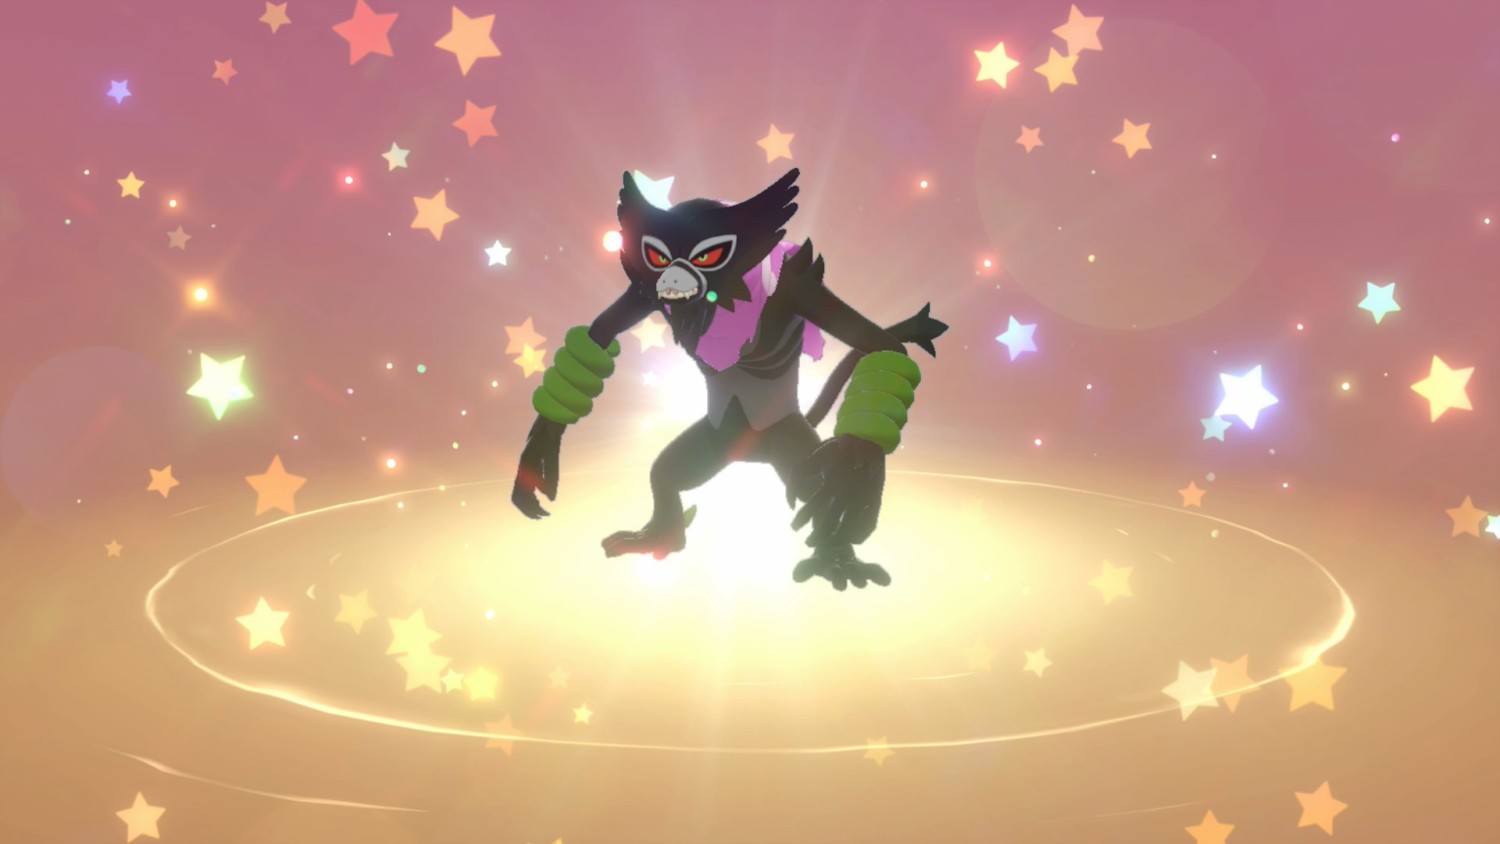 Pokémon Sword And Shield Players Can Now Sign Up For A Zarude Code (Europe)